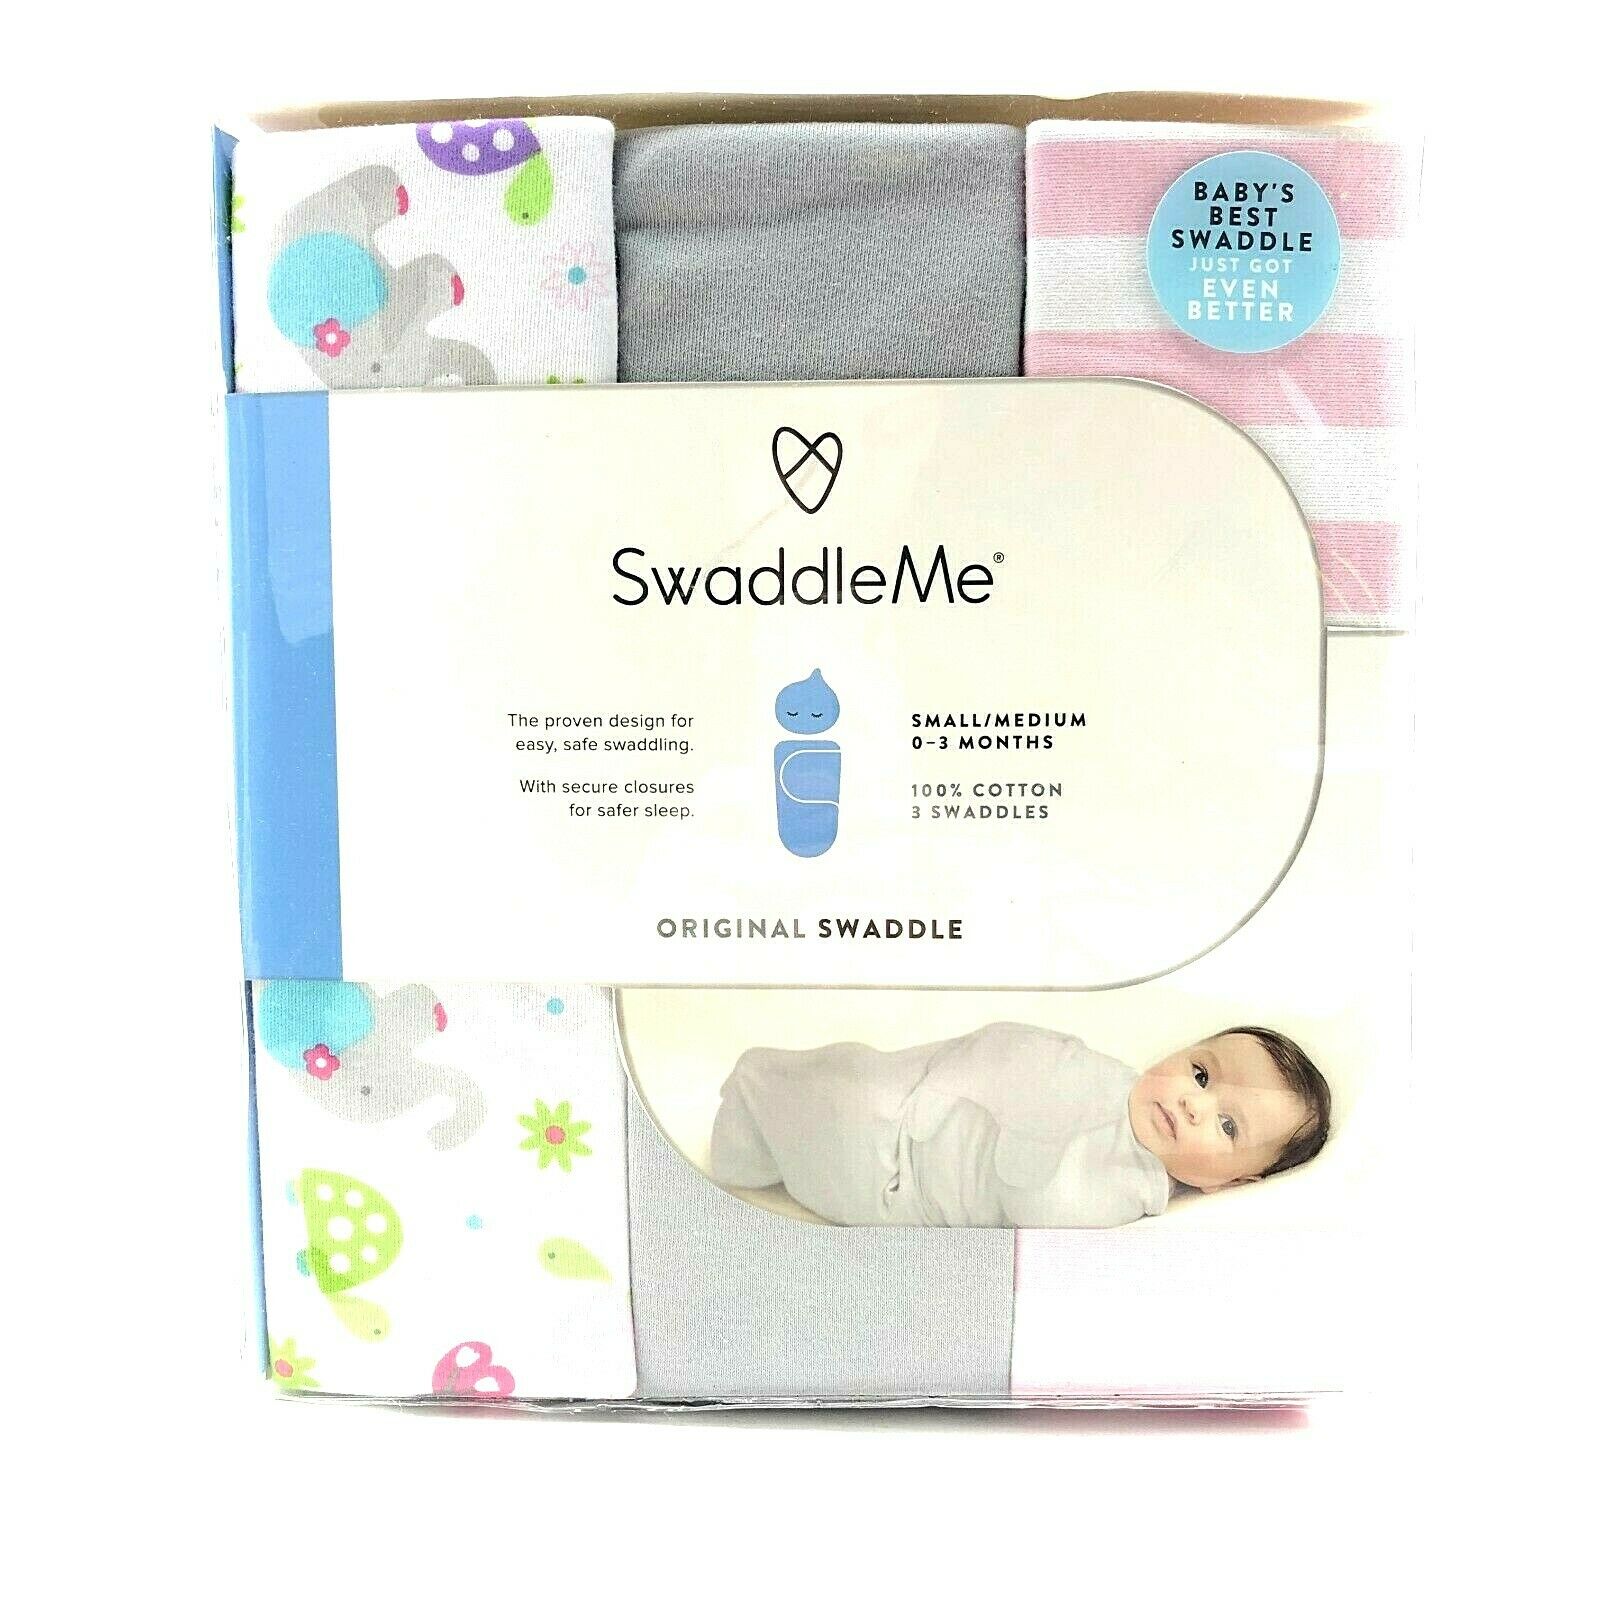 Swaddleme Original Swaddle Busy Bees Sm 3 Pieces